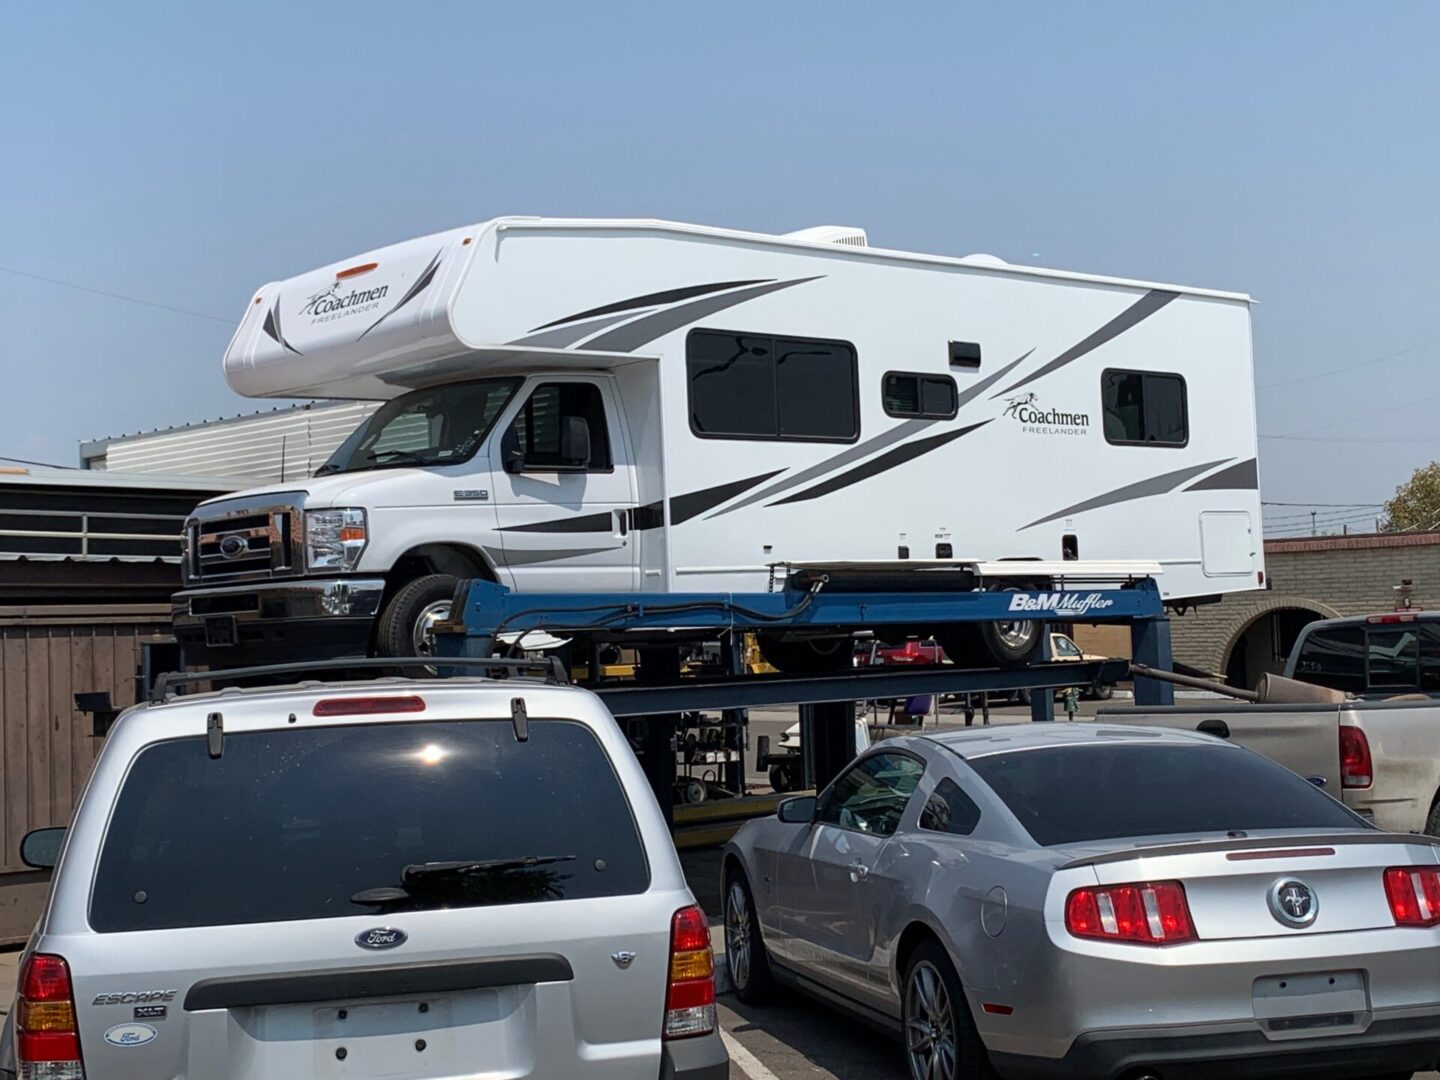 A white rv is being loaded onto the back of a truck.